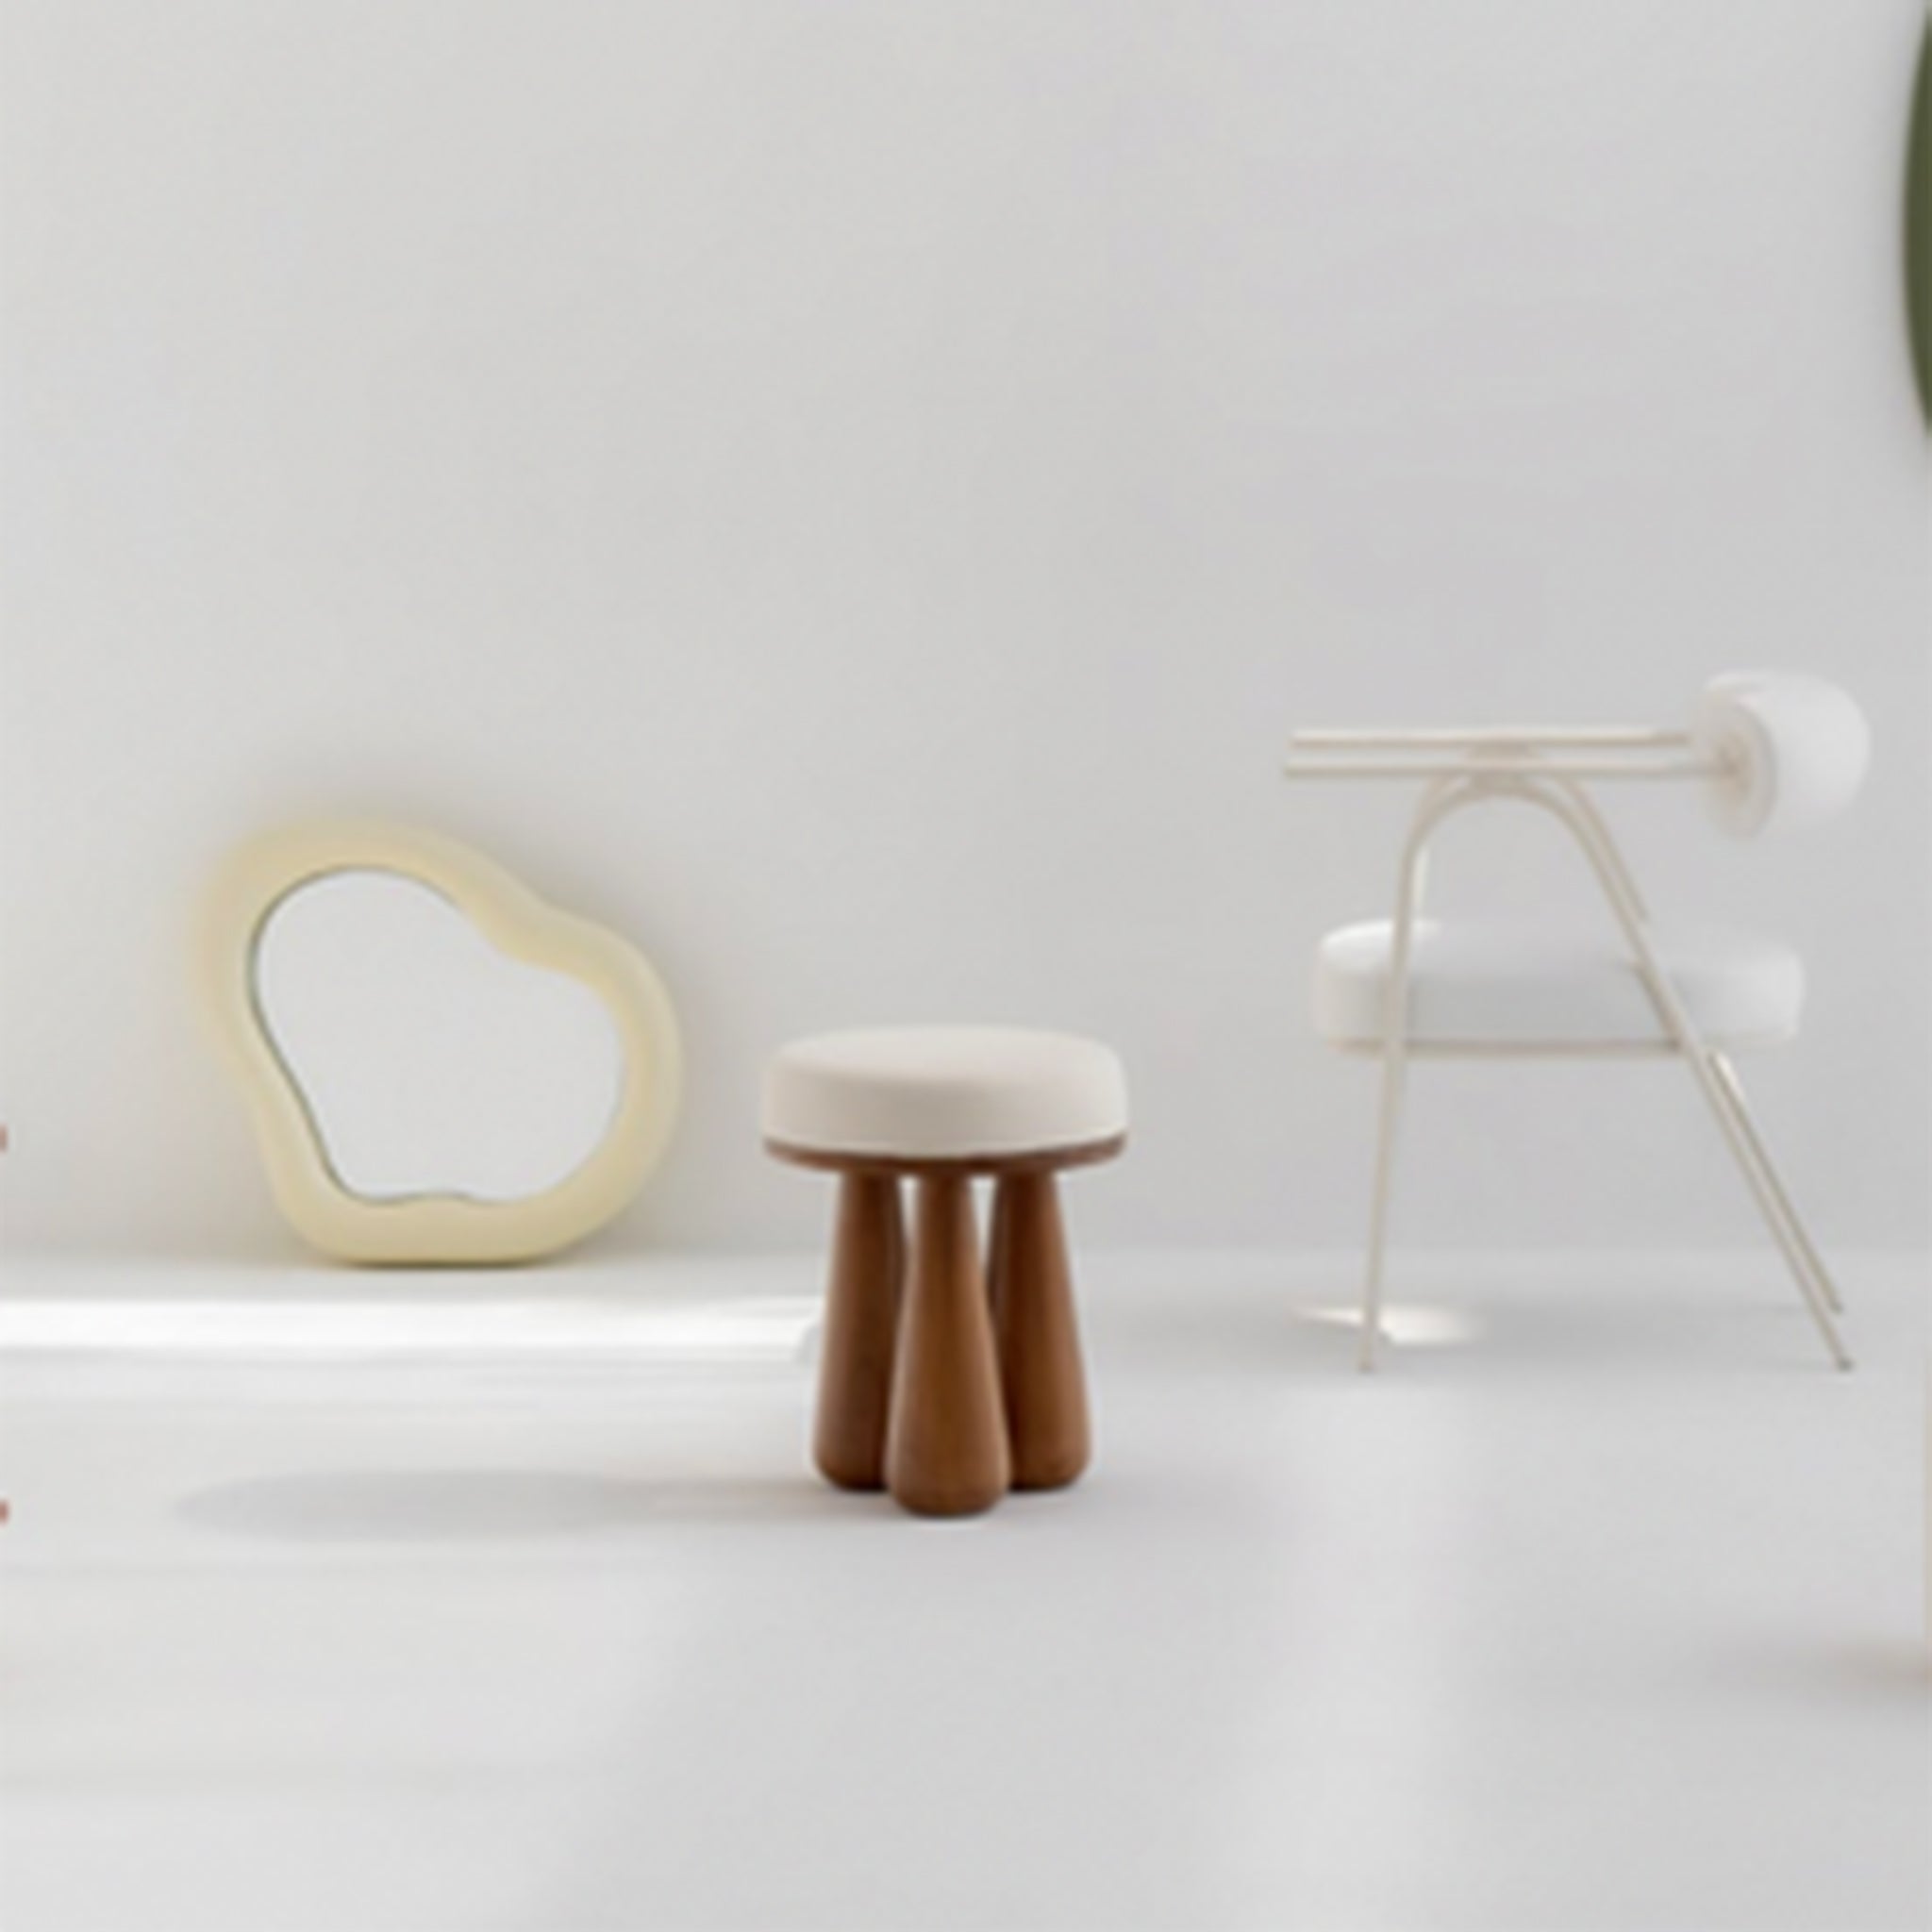 Modern interior with a wooden stool featuring chunky legs and a round upholstered white seat, a unique mirror, and a contemporary white chair